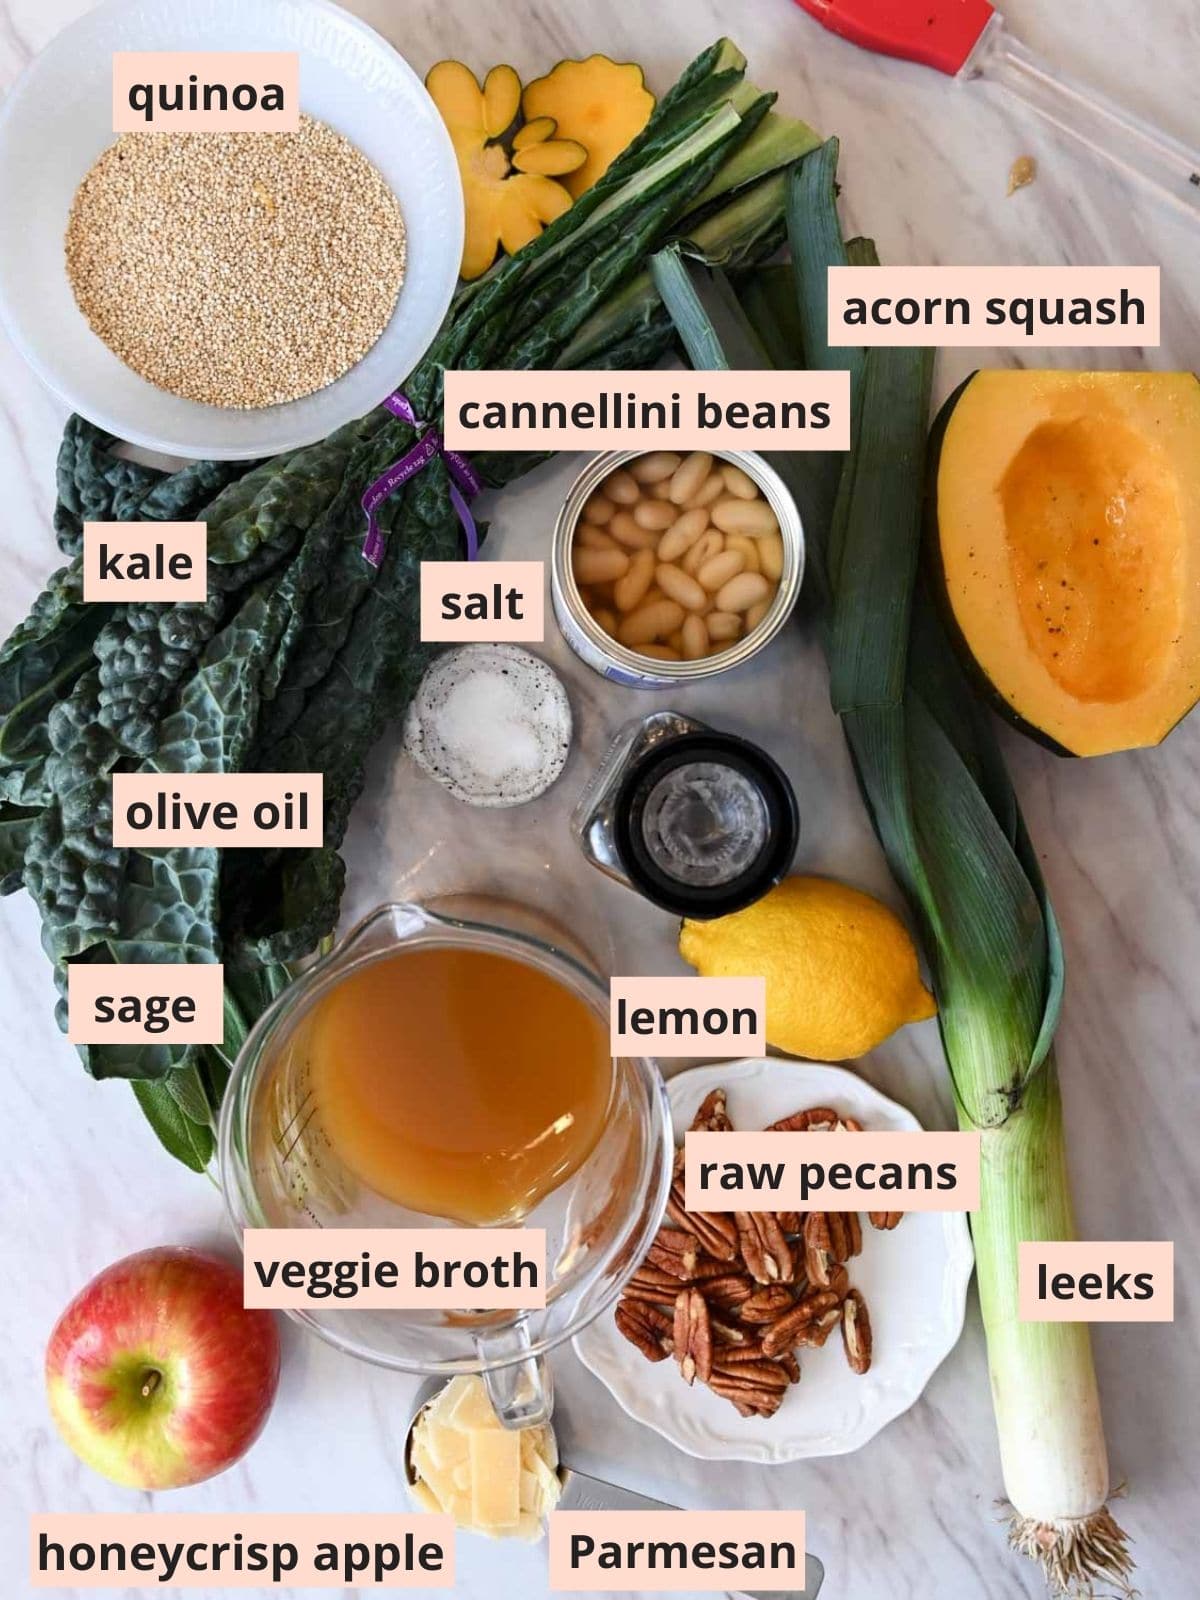 Labeled ingredients used to make acorn squash